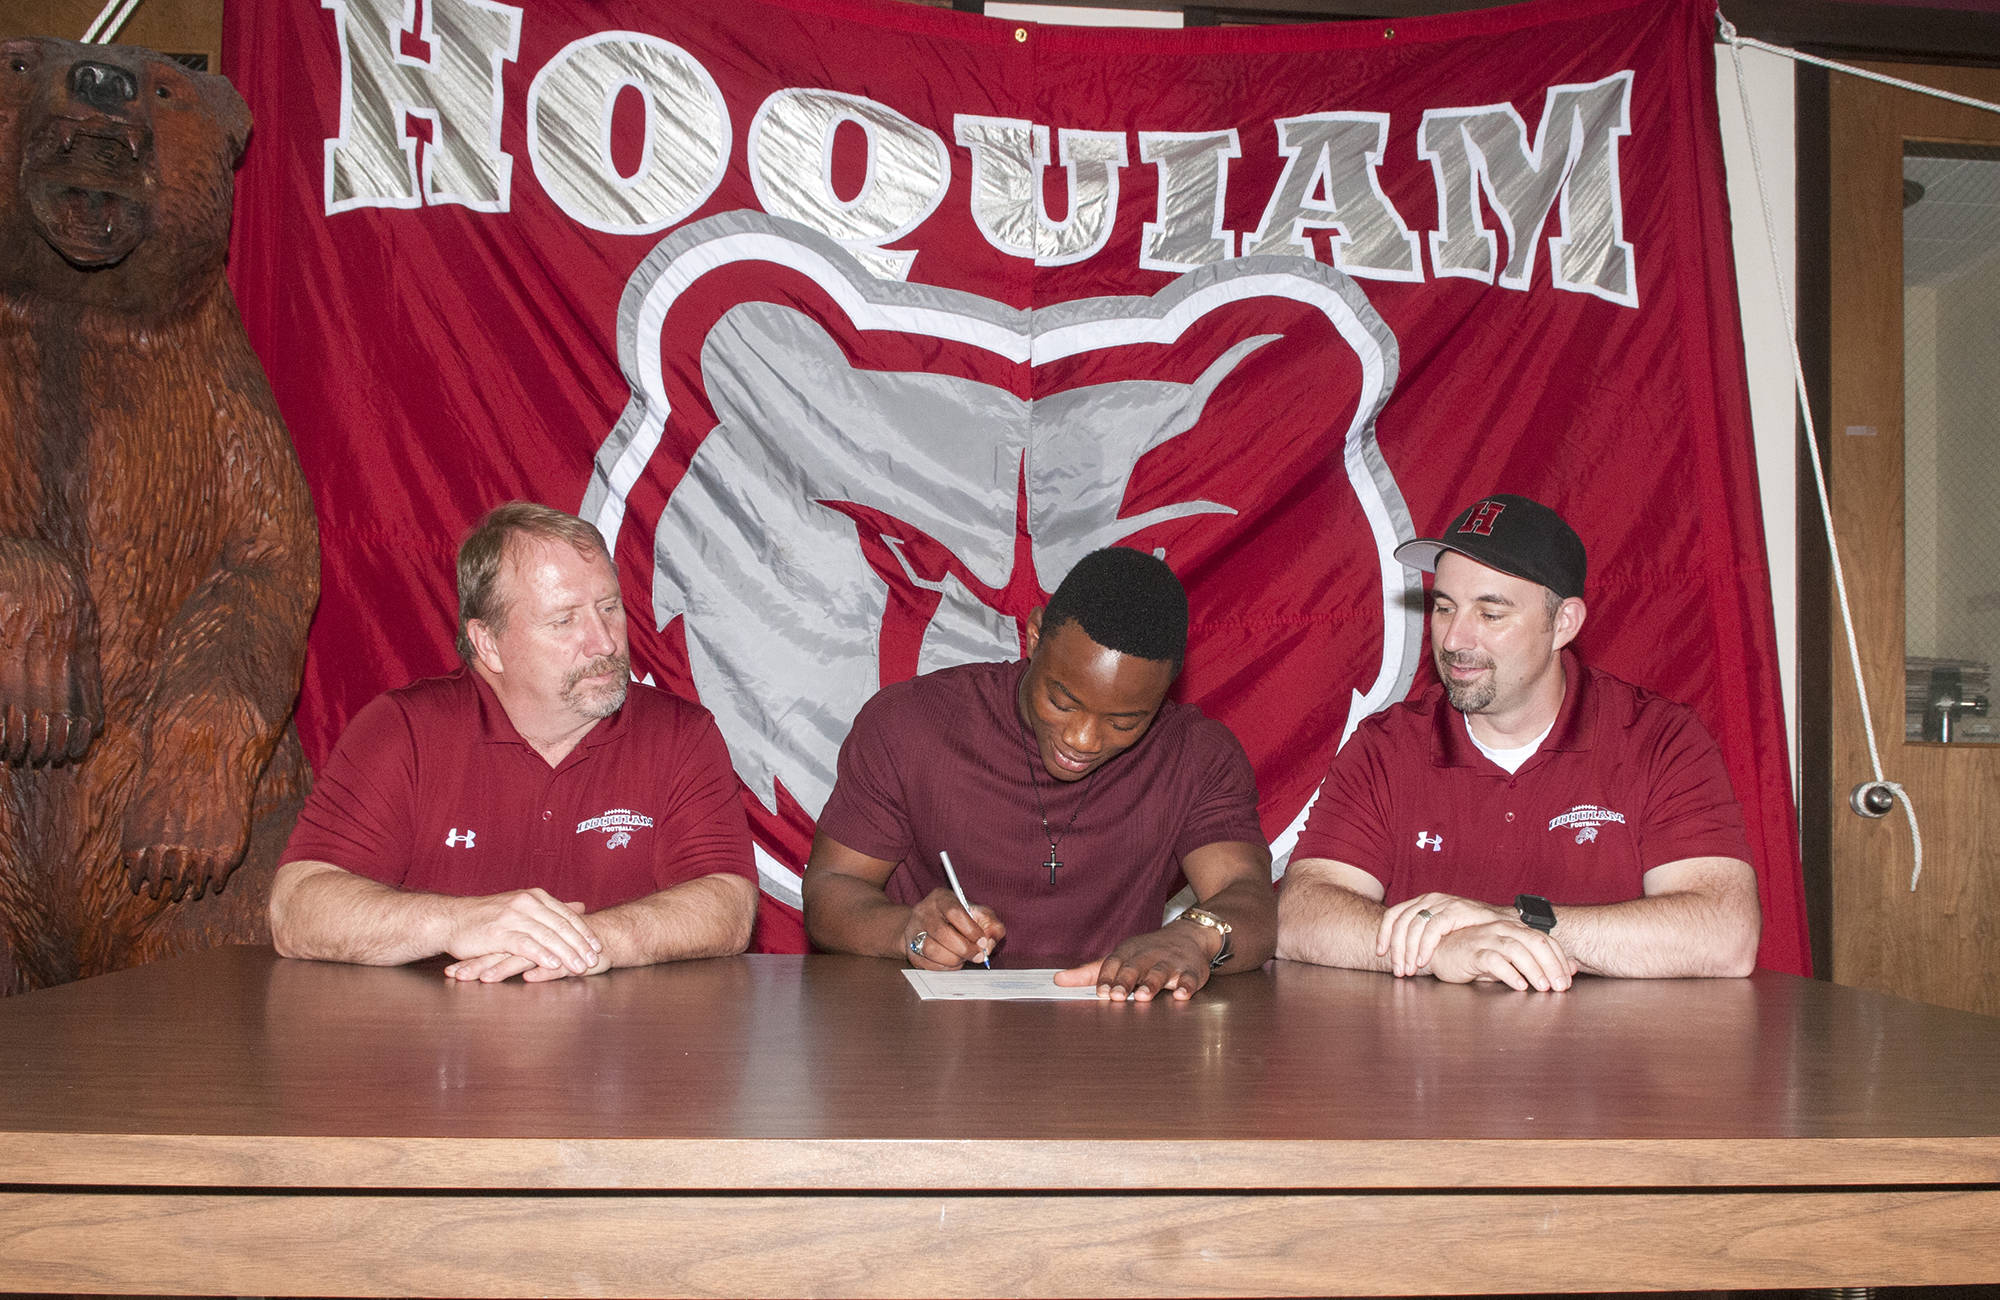 (Brendan Carl | The Daily World) Hoquiam’s Artimus Johnson signs a letter of intent to play football at Linfield College as Grizzly coaches Rick Moore, left, and Jeremy McMillan watch on.